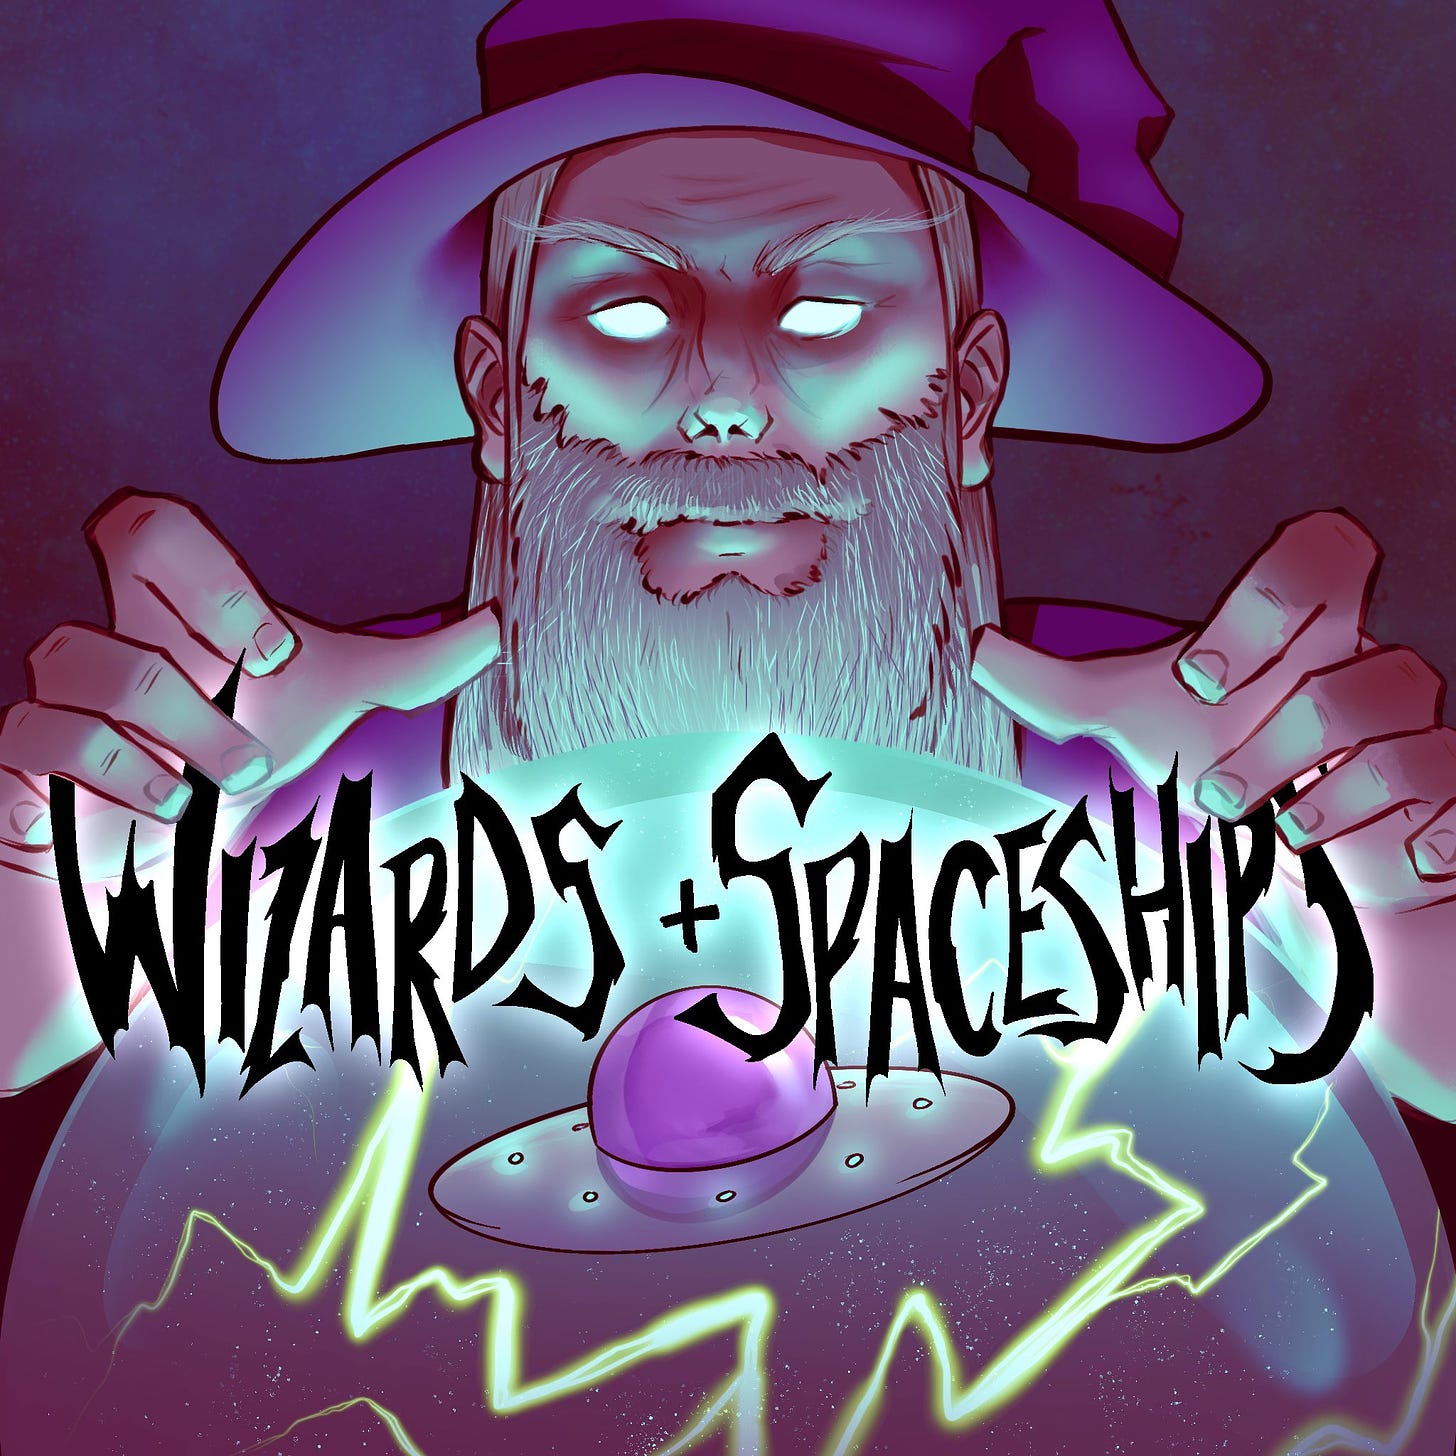 The wizards & spaceships logo with an extremely metal wizard in a purple hat casting lightning on a ufo trapped in an orb. Sick.